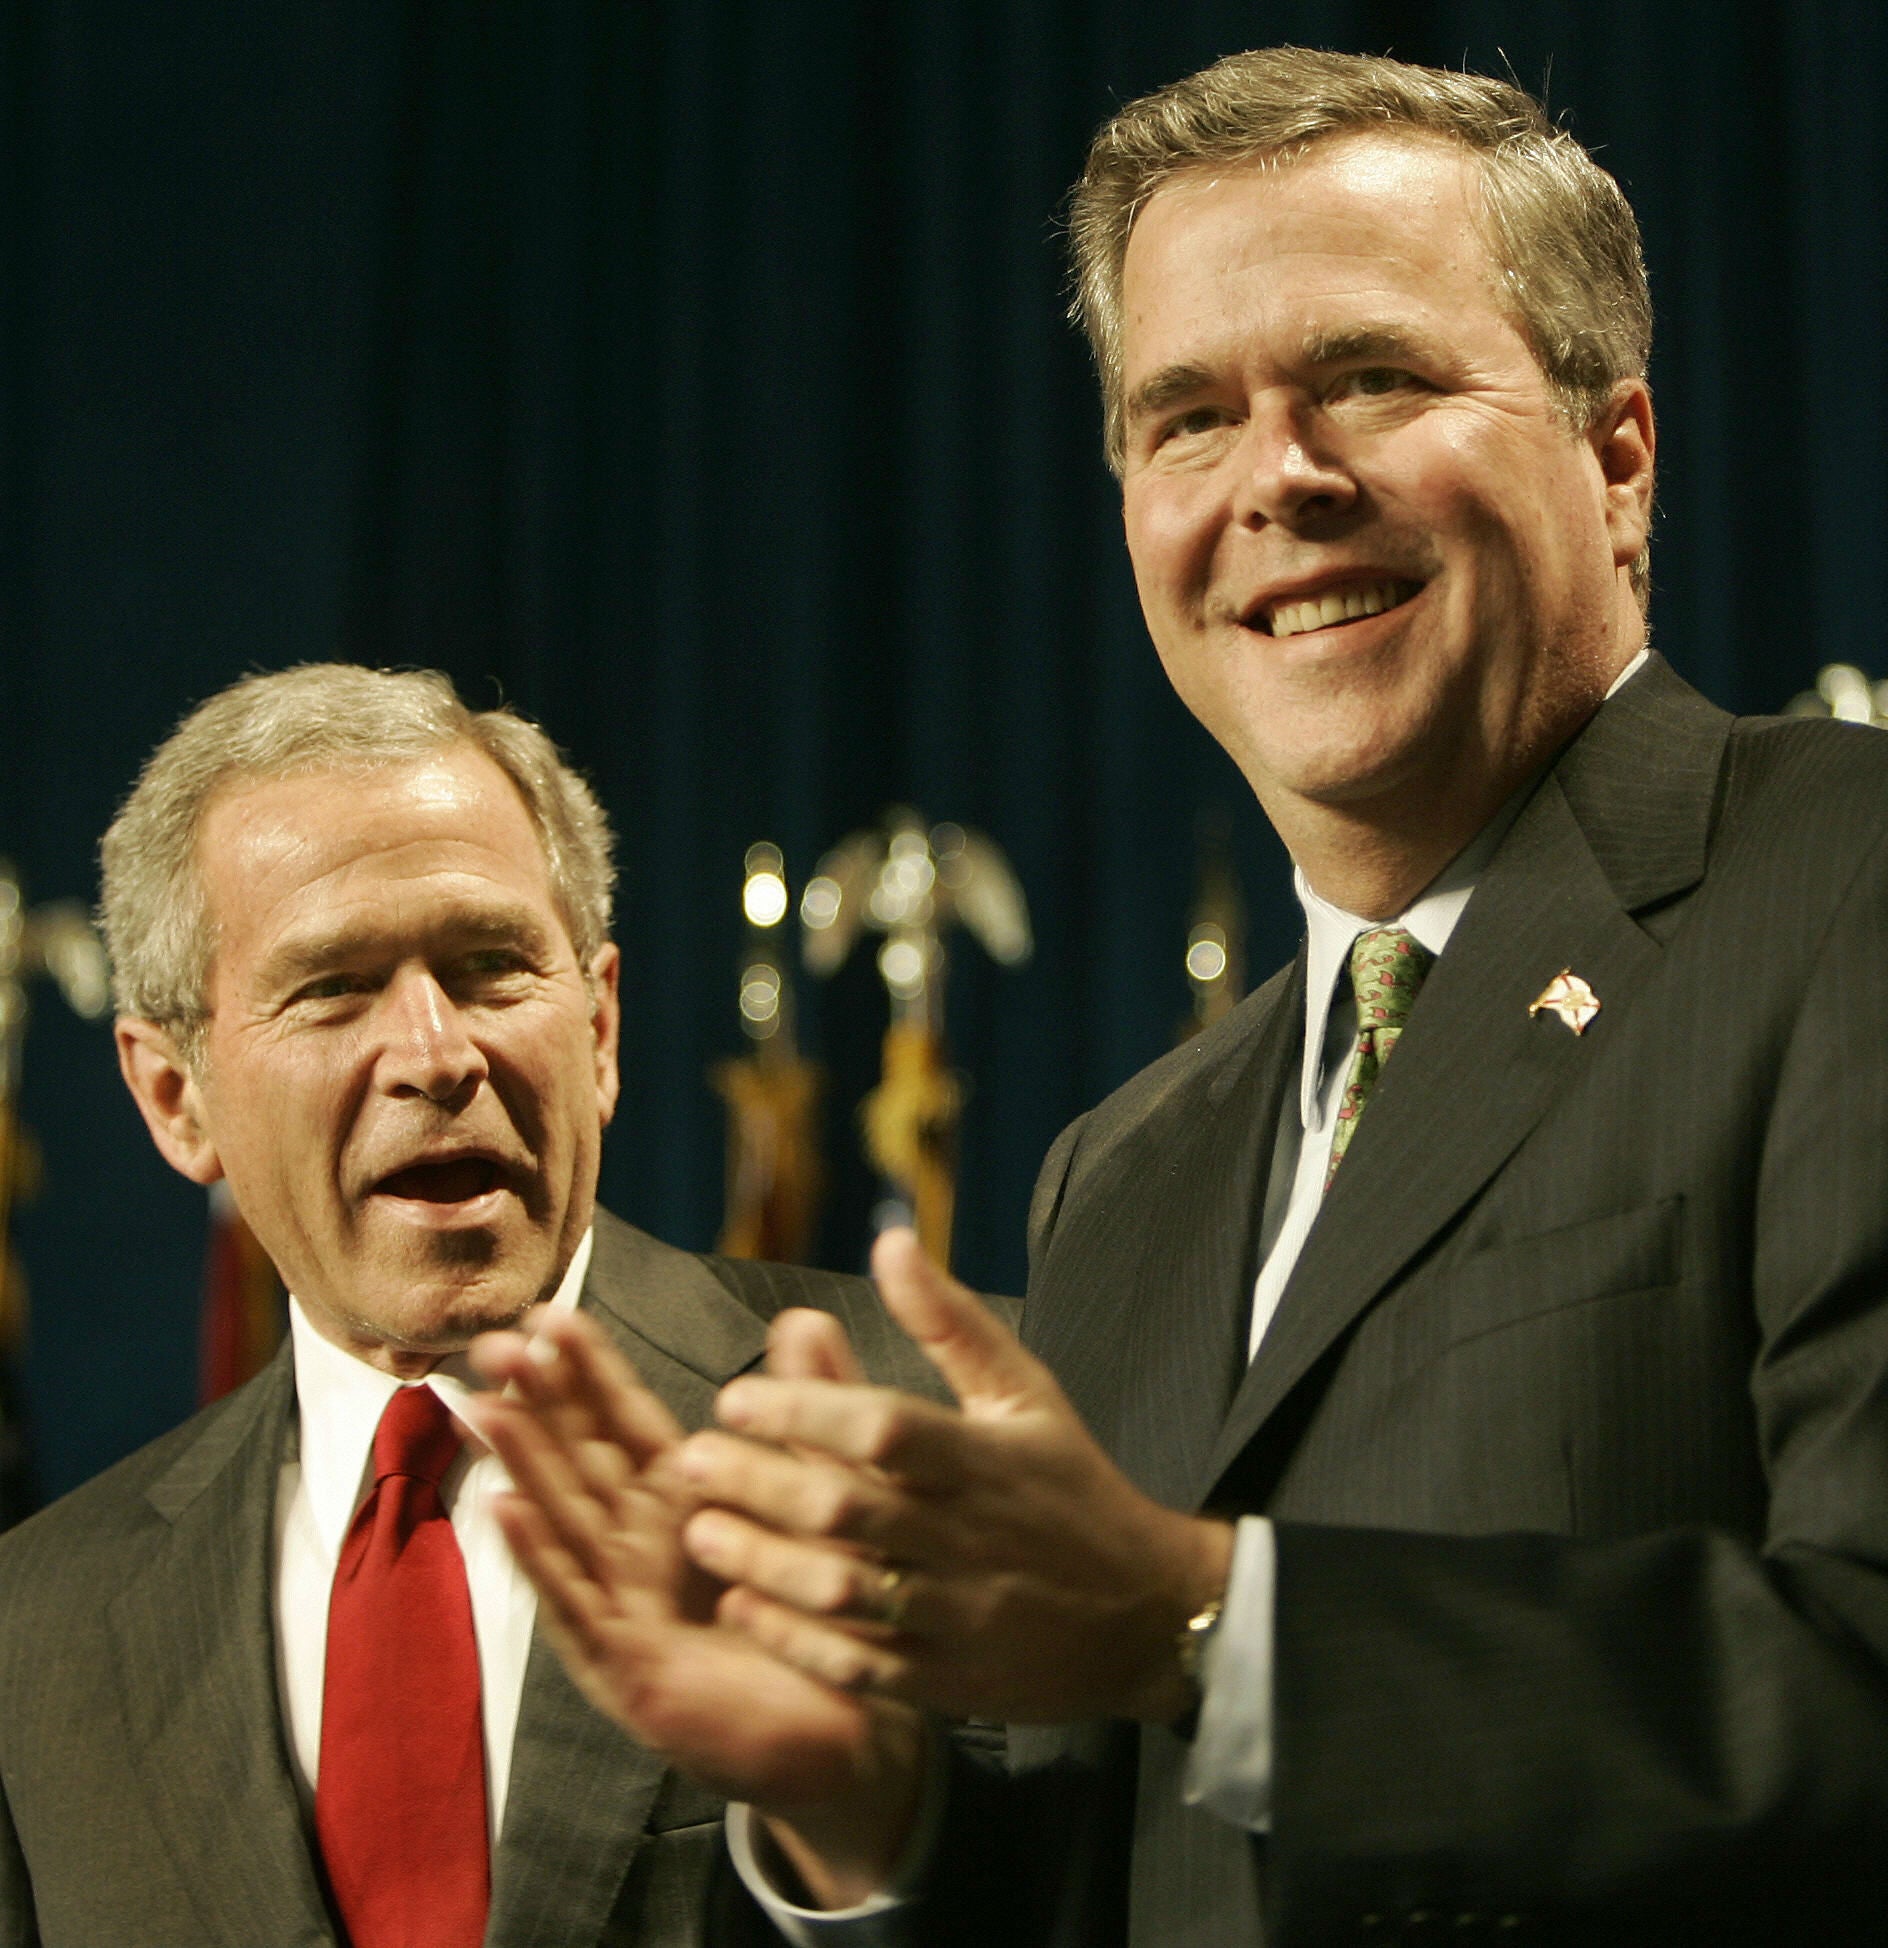 George W Bush plans to appear at a rally in North Charleston